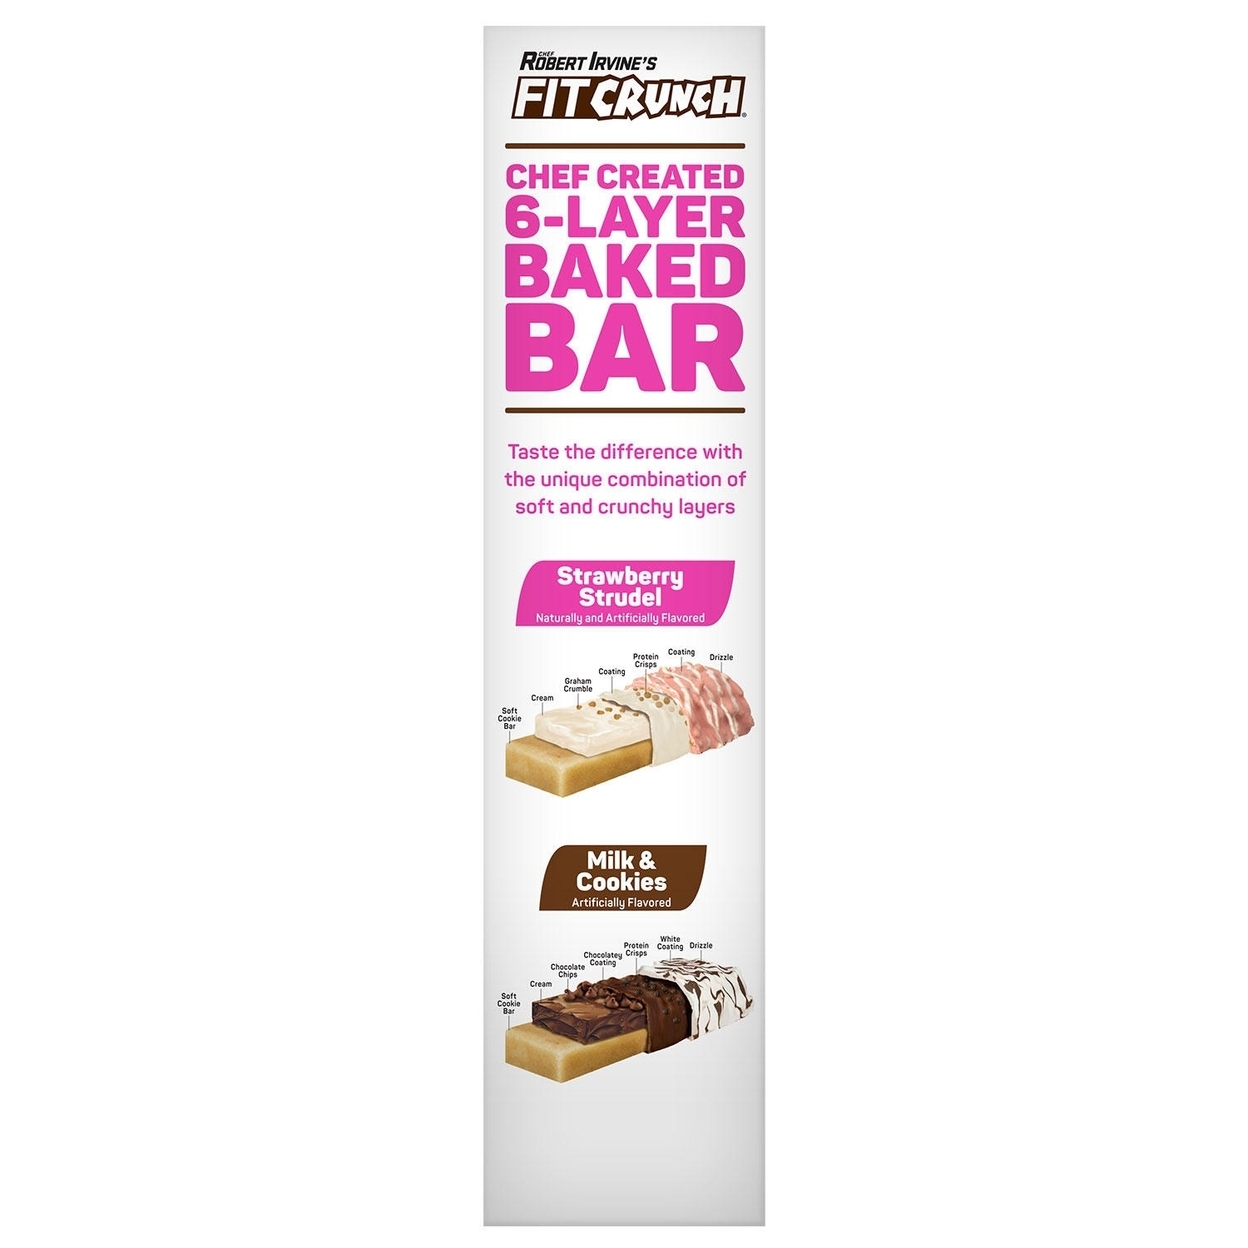 FITCRUNCH High Protein Baked Bars, Strawberry Strudel And Milk & Cookies (18 Ct)